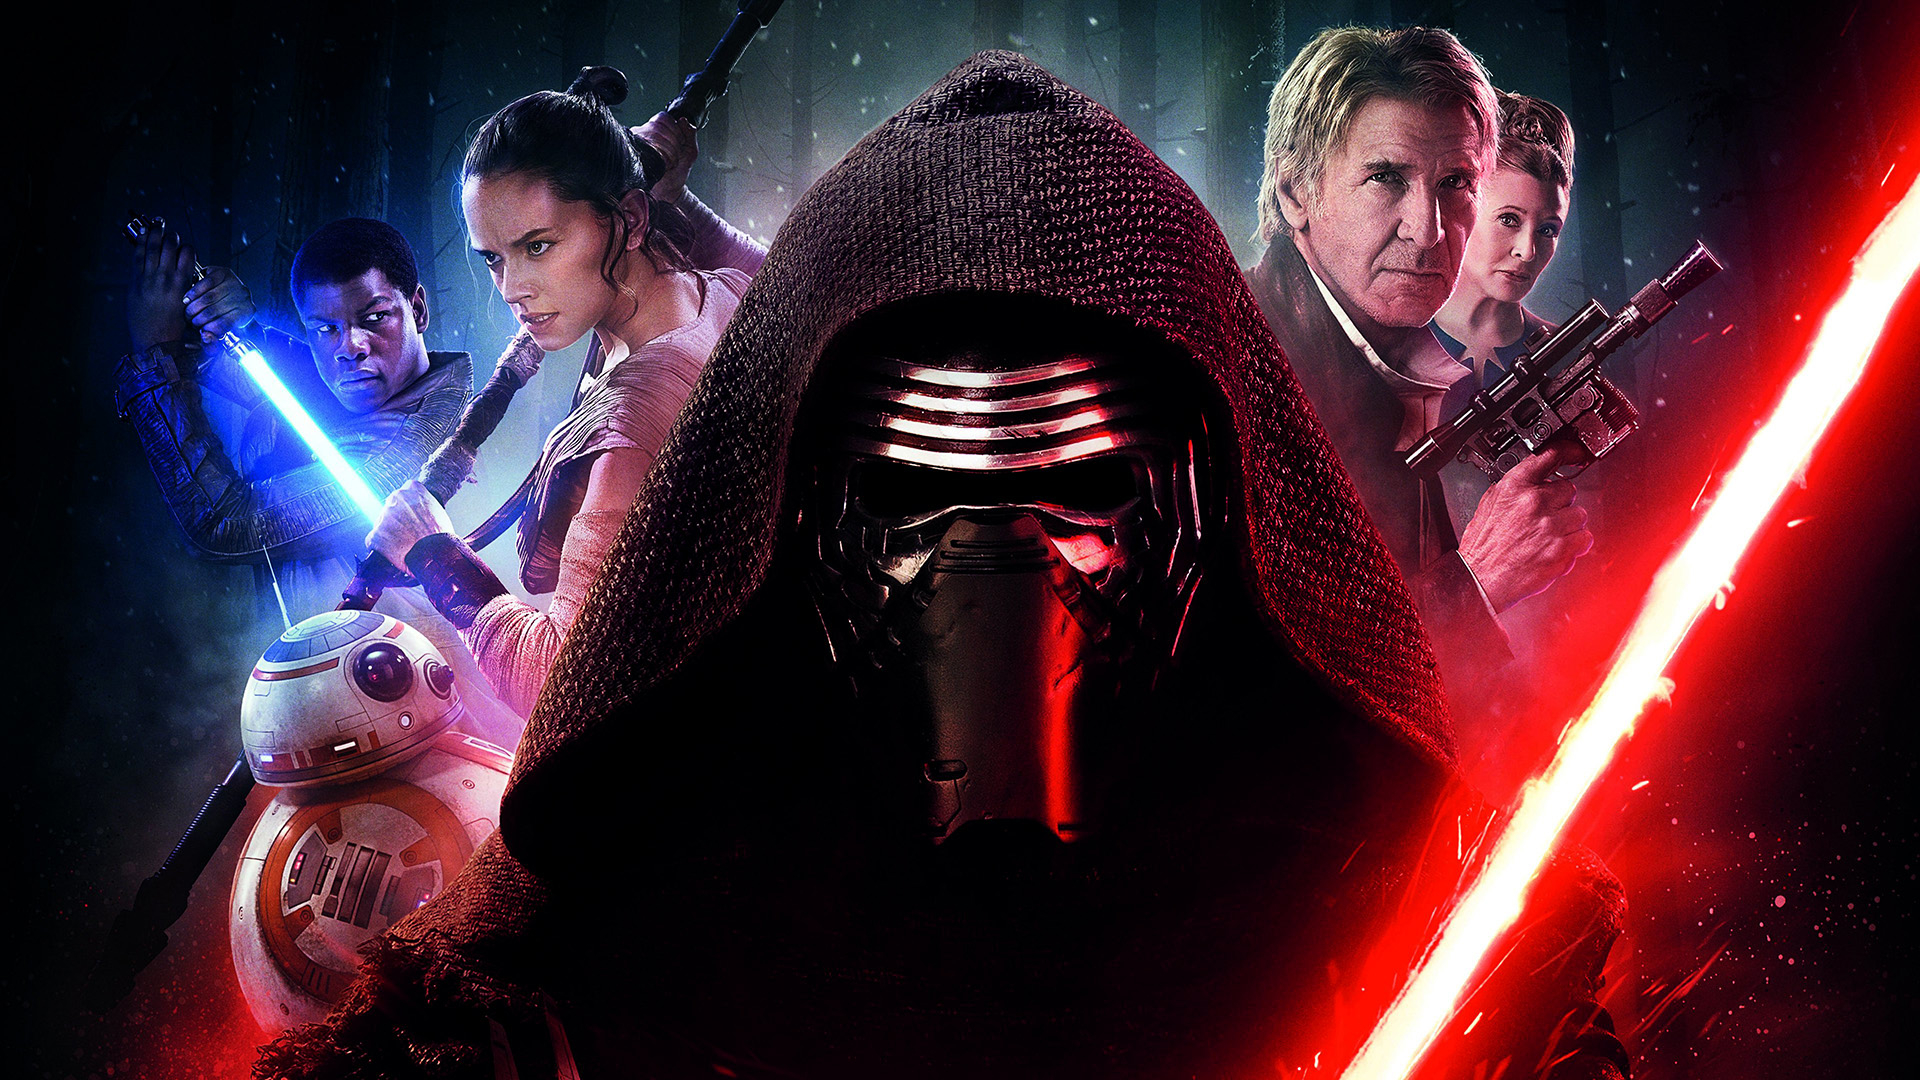 1920x1080 210+ Star Wars Episode VII: The Force Awakens HD Wallpapers, Achtergronde